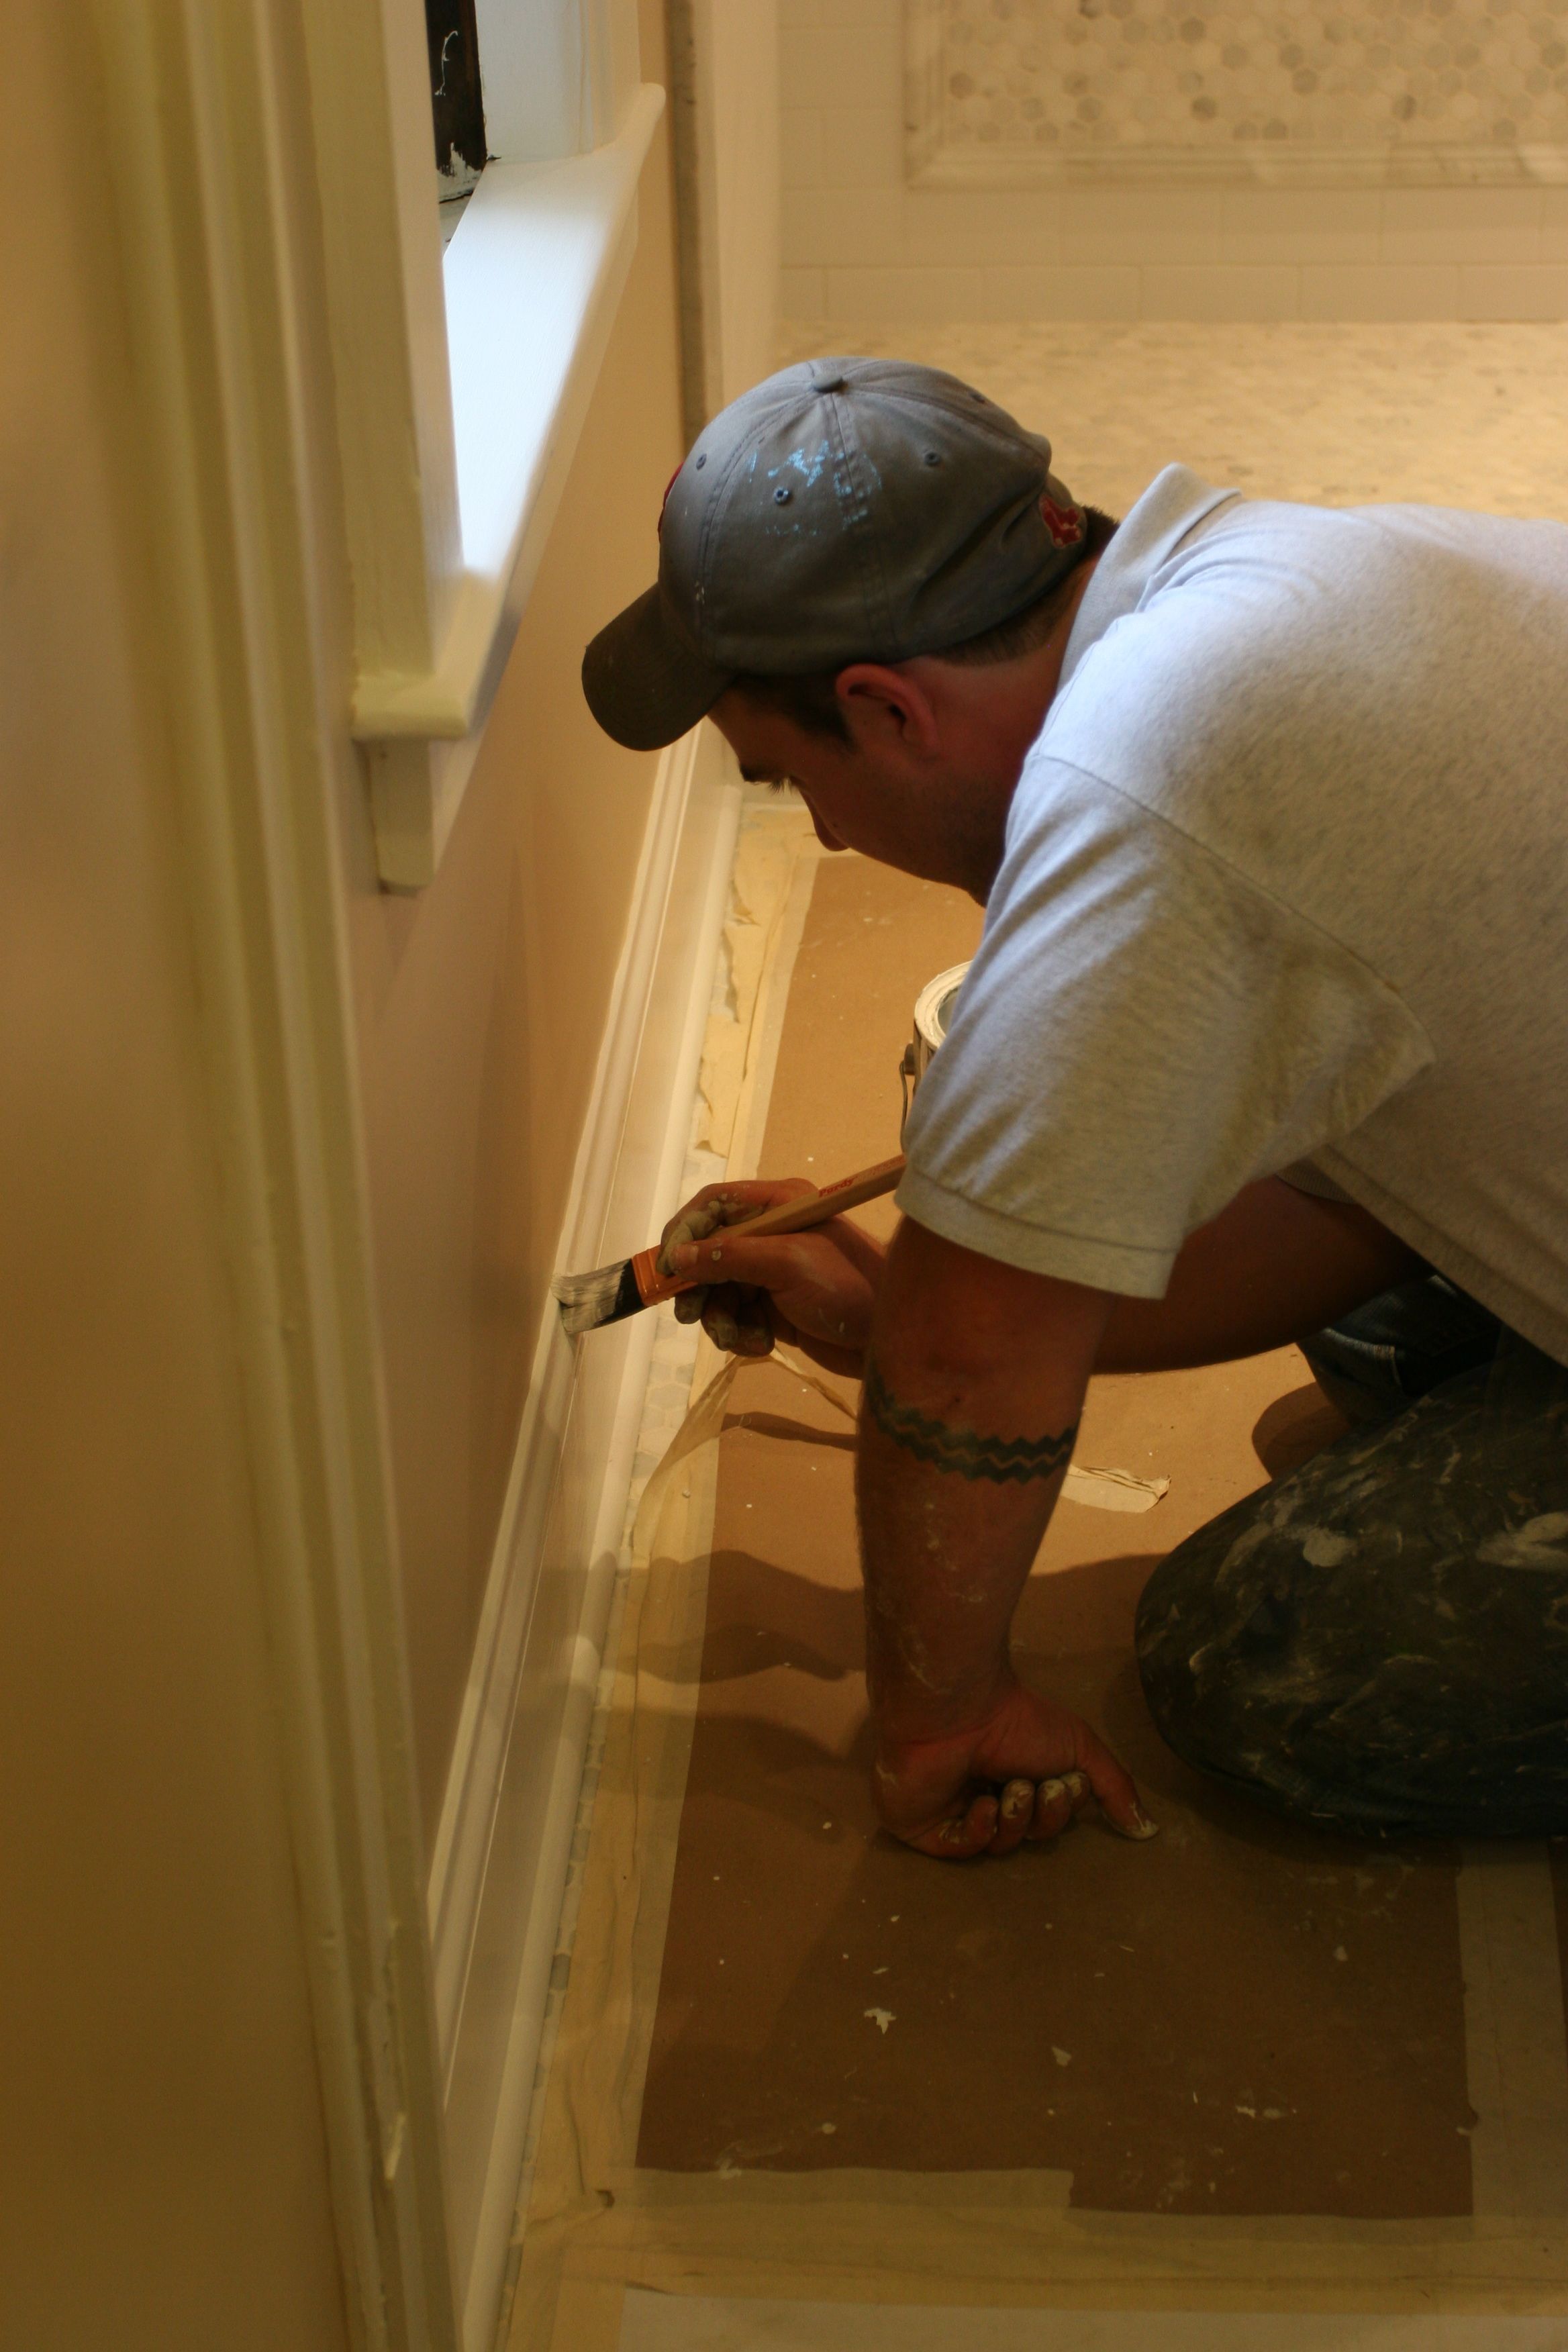 Dave painstakingly straightening out a cut line on the baseboard. This is why we love him so.